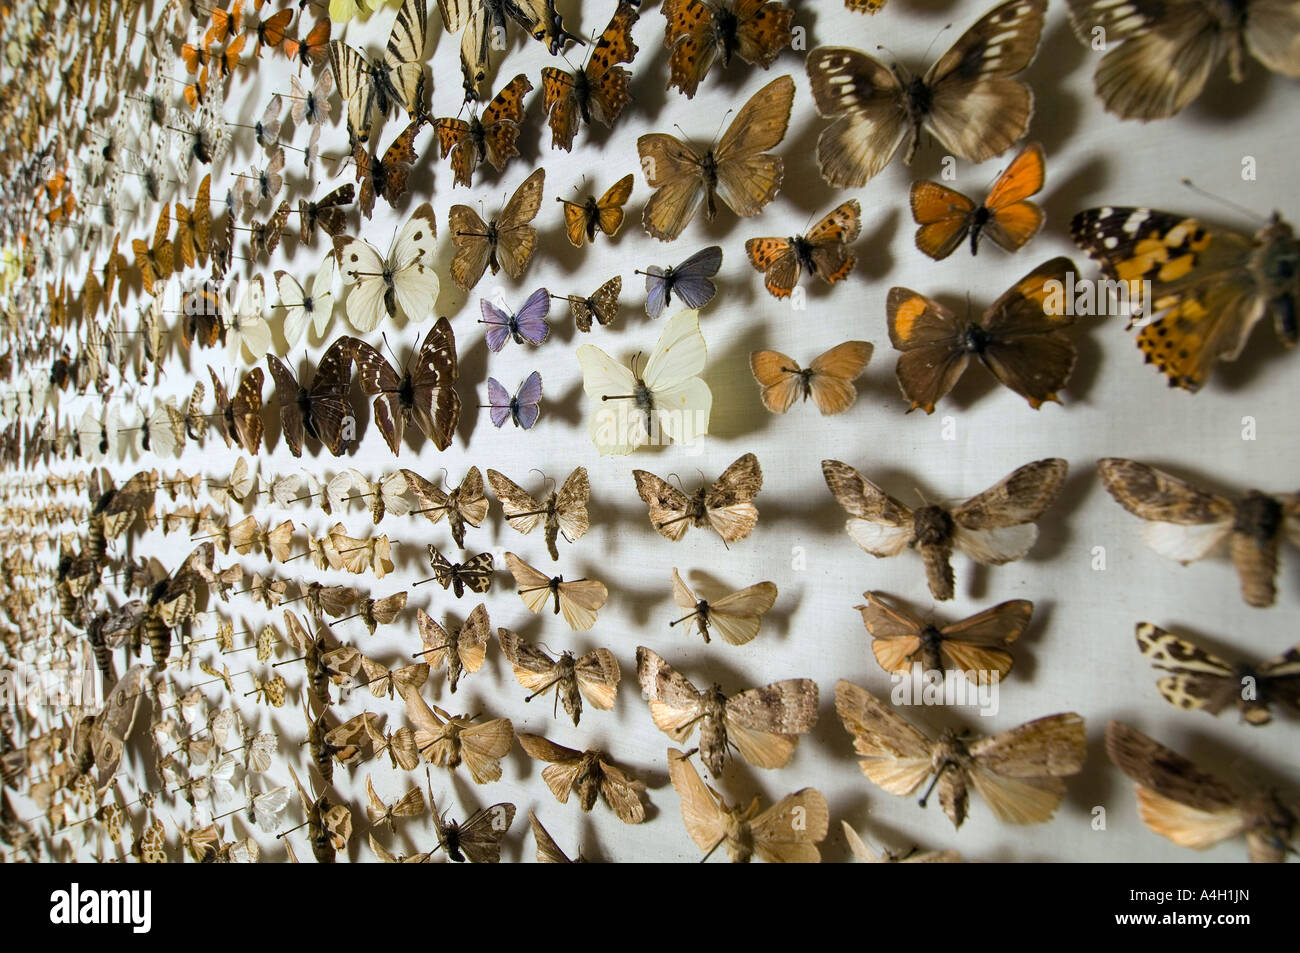 Butterfly collection at the Museum of Natural History in Berlin, Germany Stock Photo